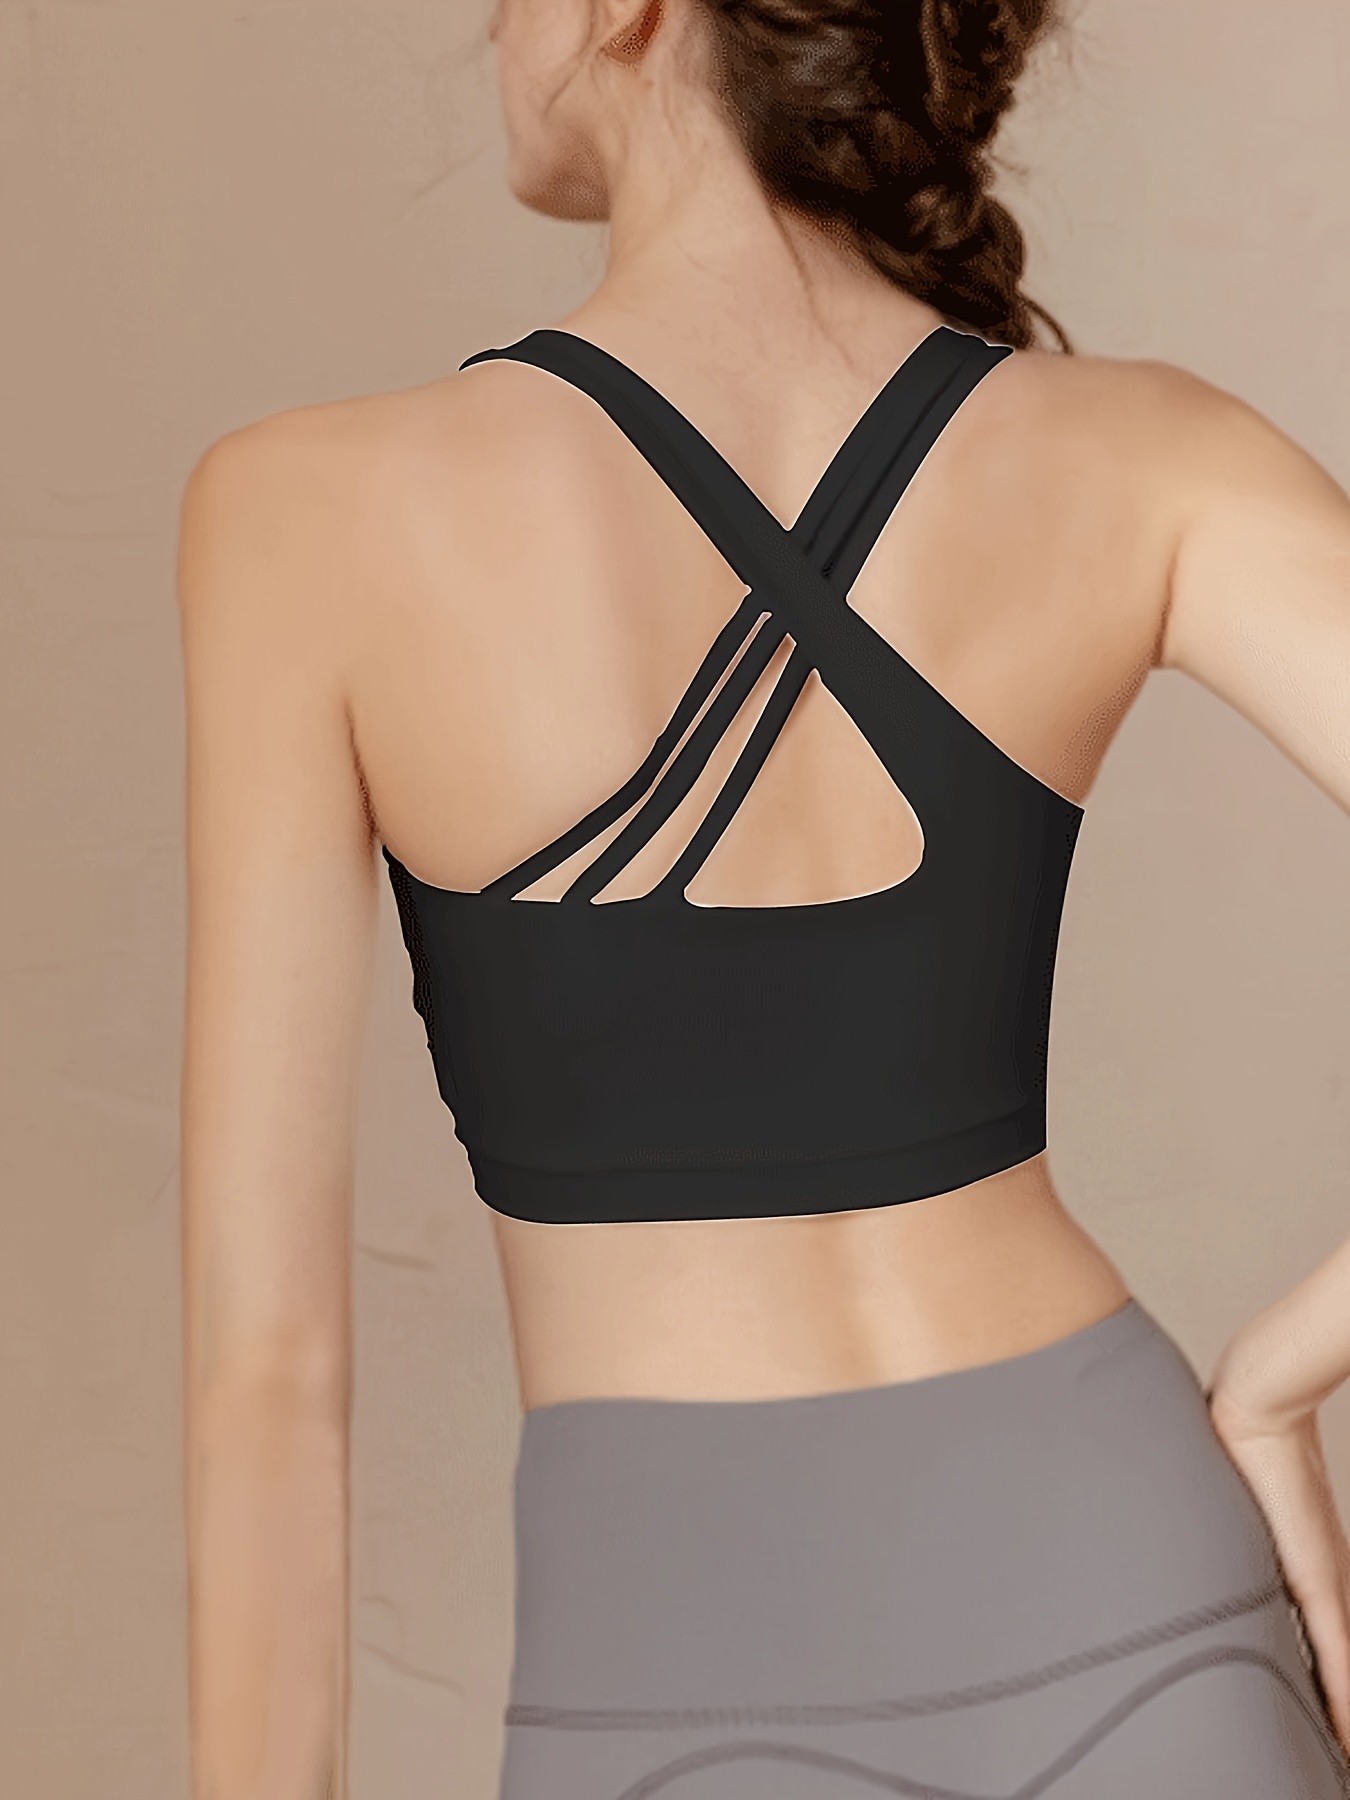 Women's Sports Bras Fitness Yoga Workout Crop Tops Padded Running Camis  Vest Gym Cropped Tanks